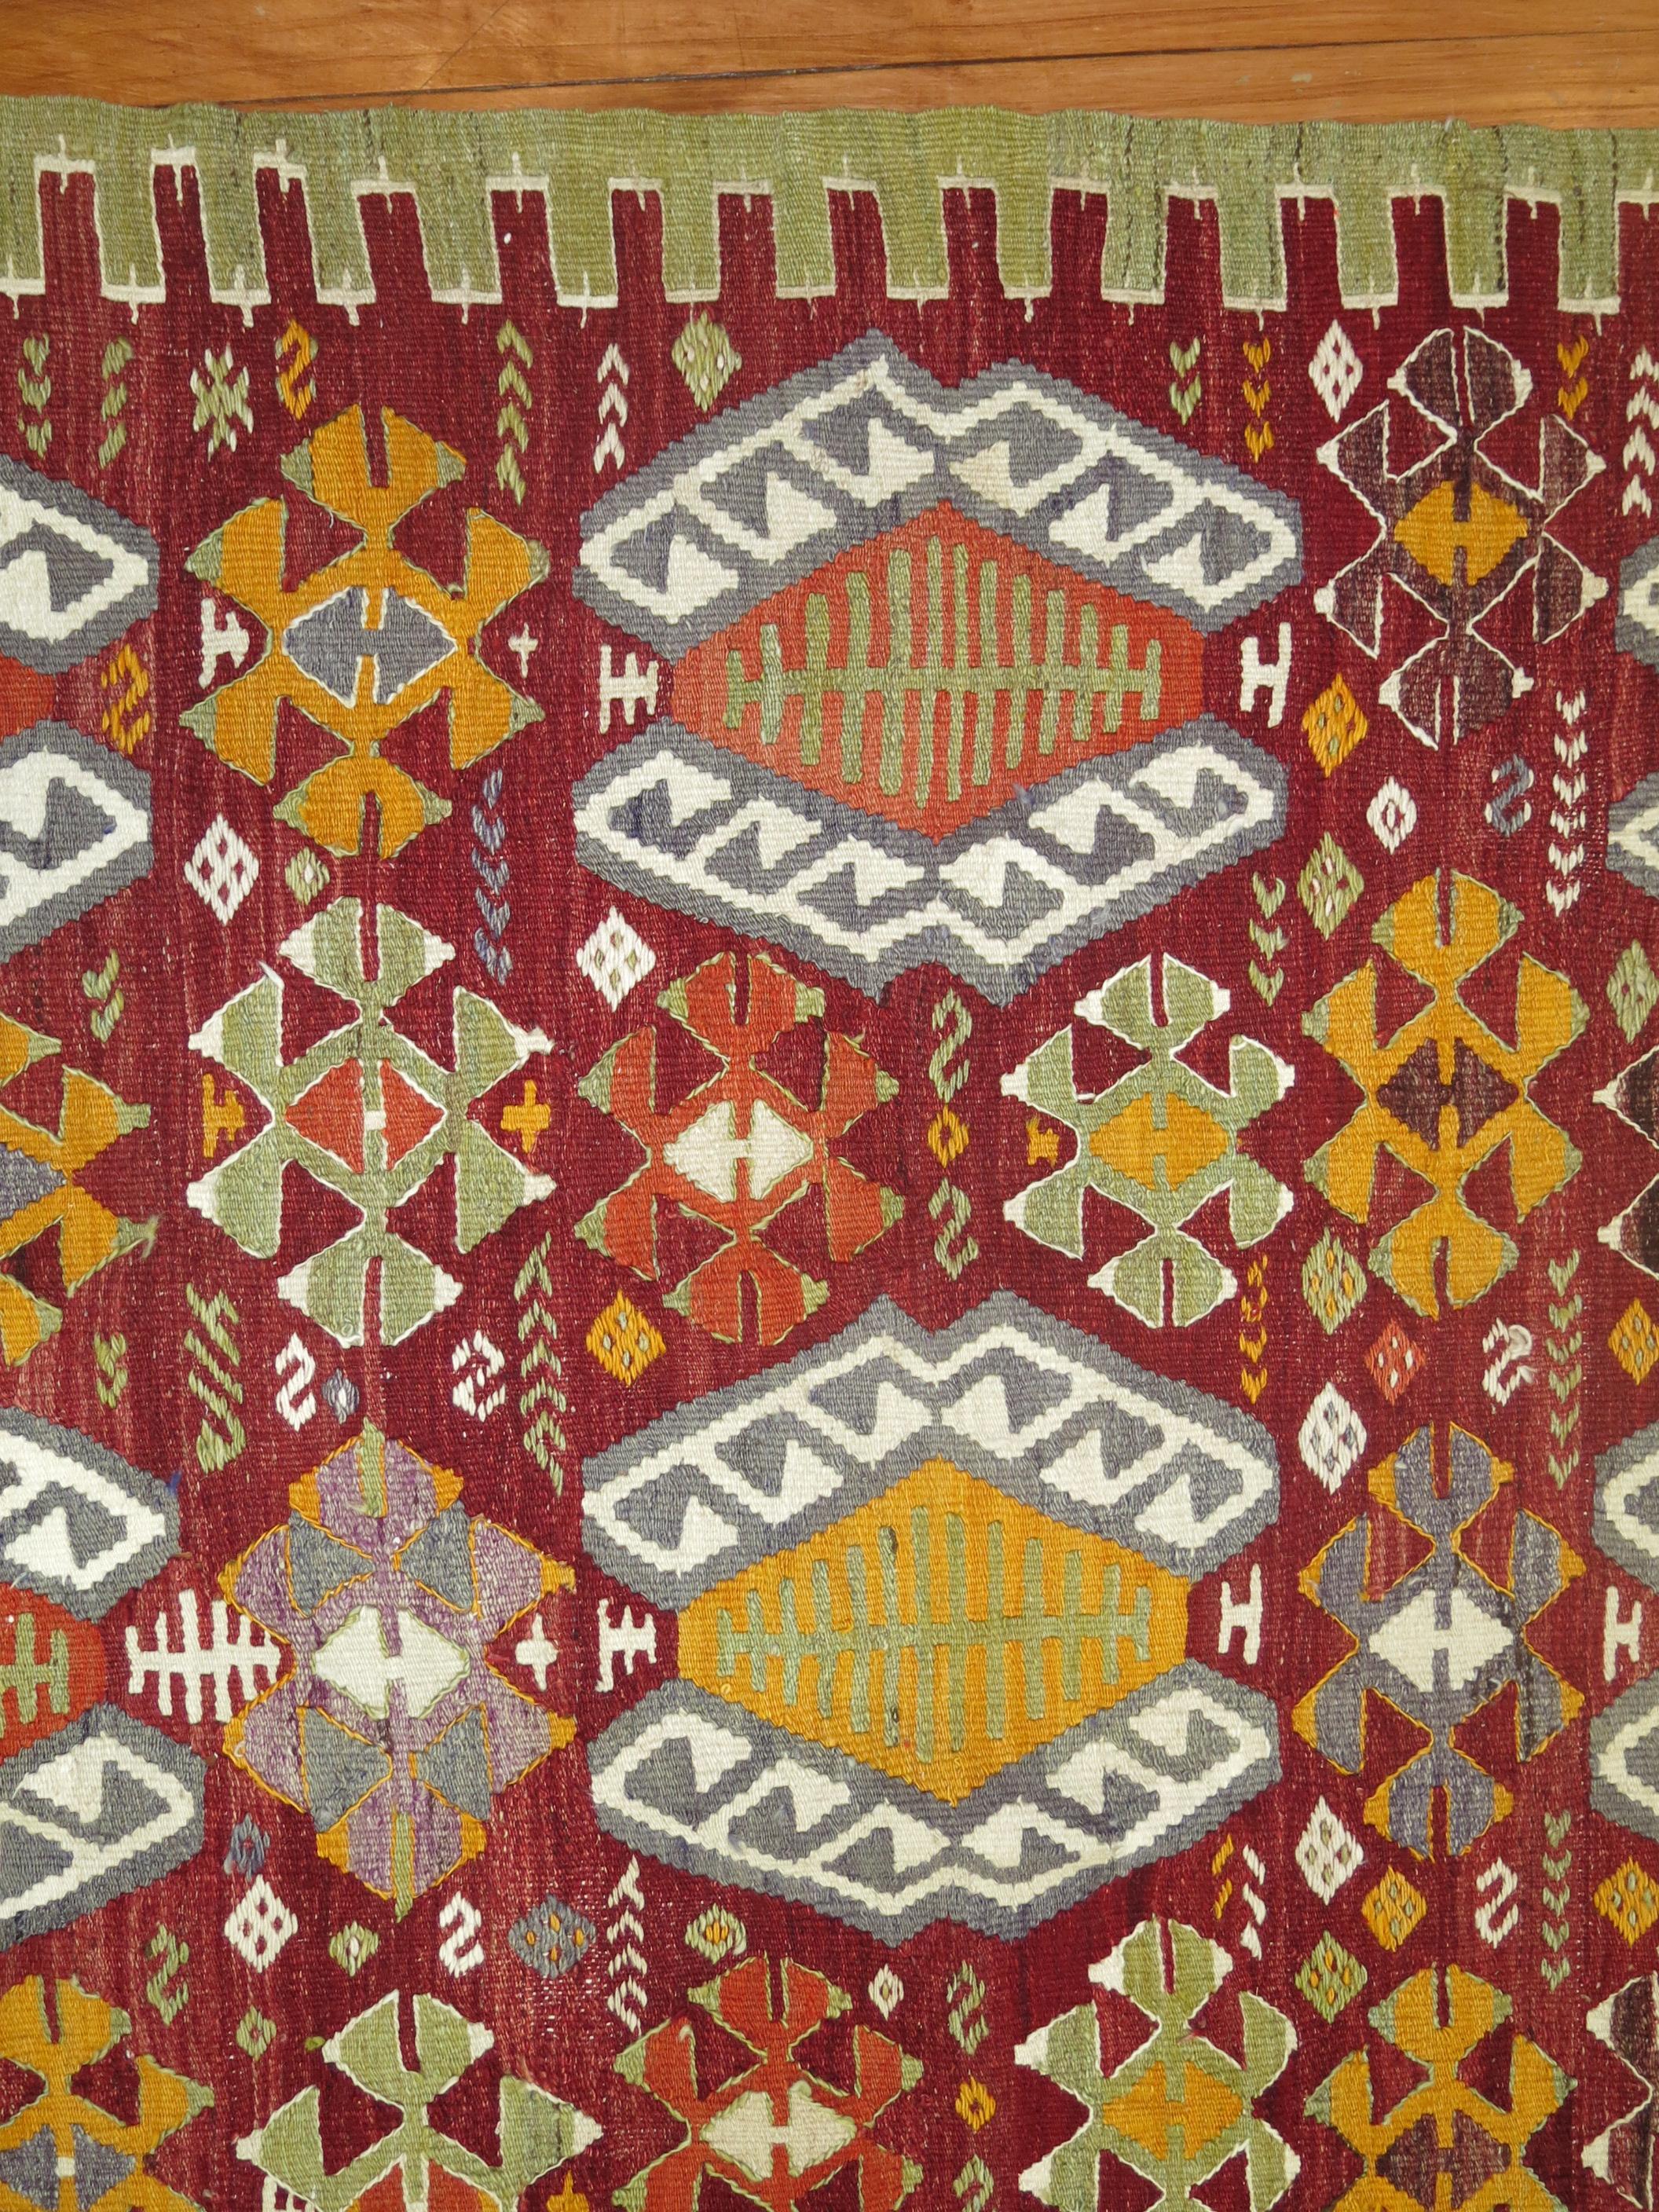 Vintage Turkish Kilim with a colorful repetitive geometric design on a vivid red colored ground.